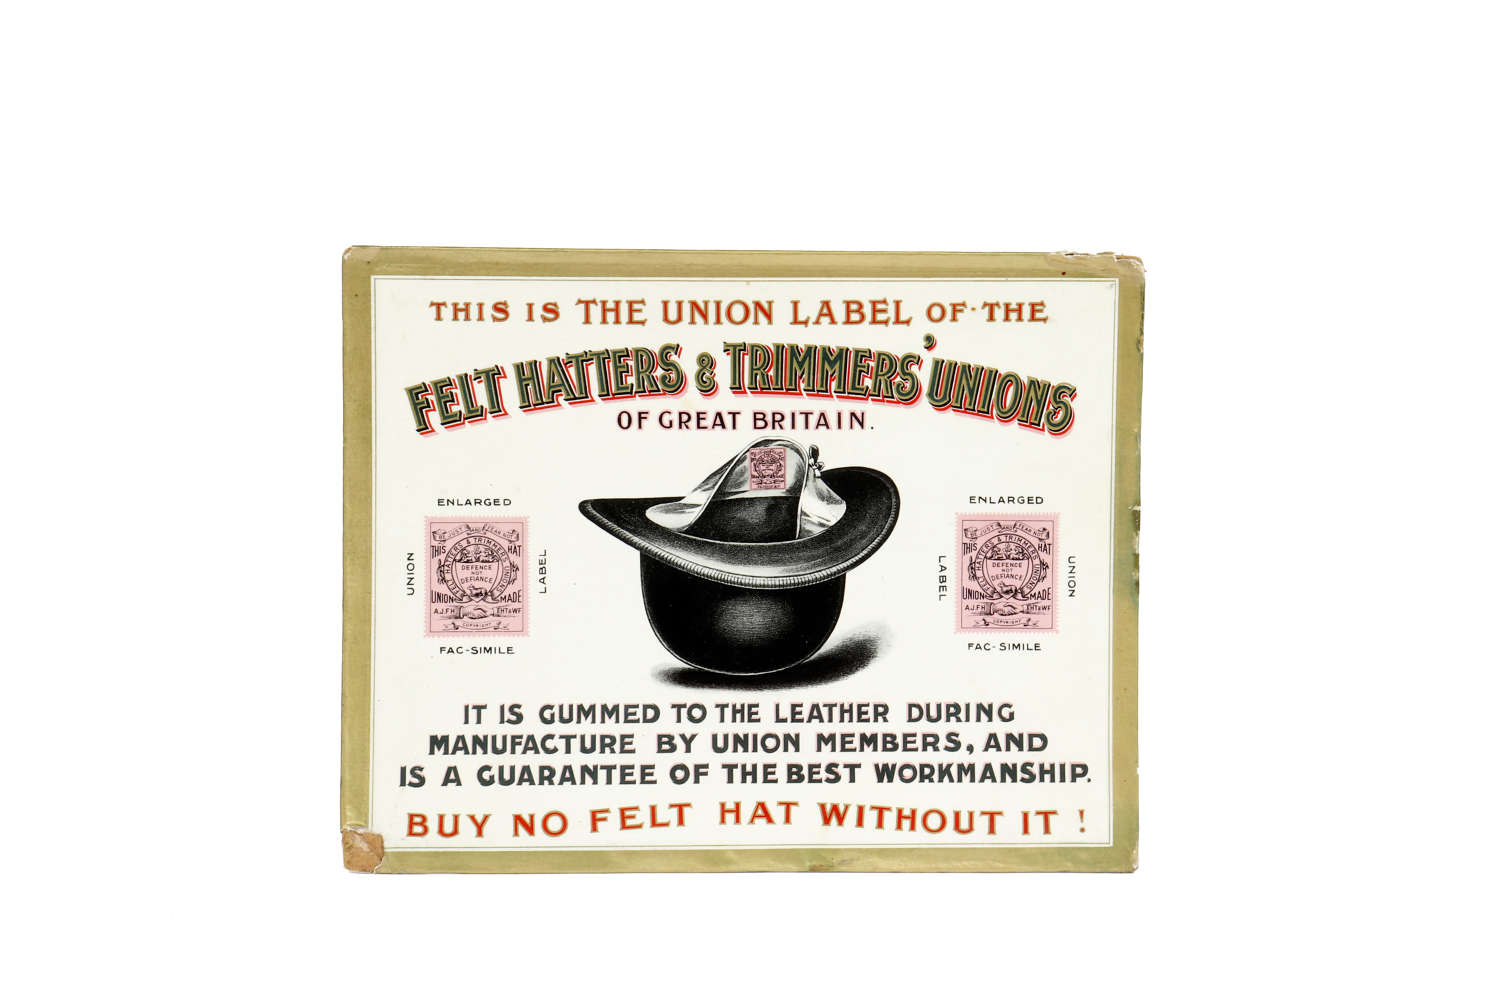 Original advertising showcard for The Felt Hatters & Trimmers' Unions